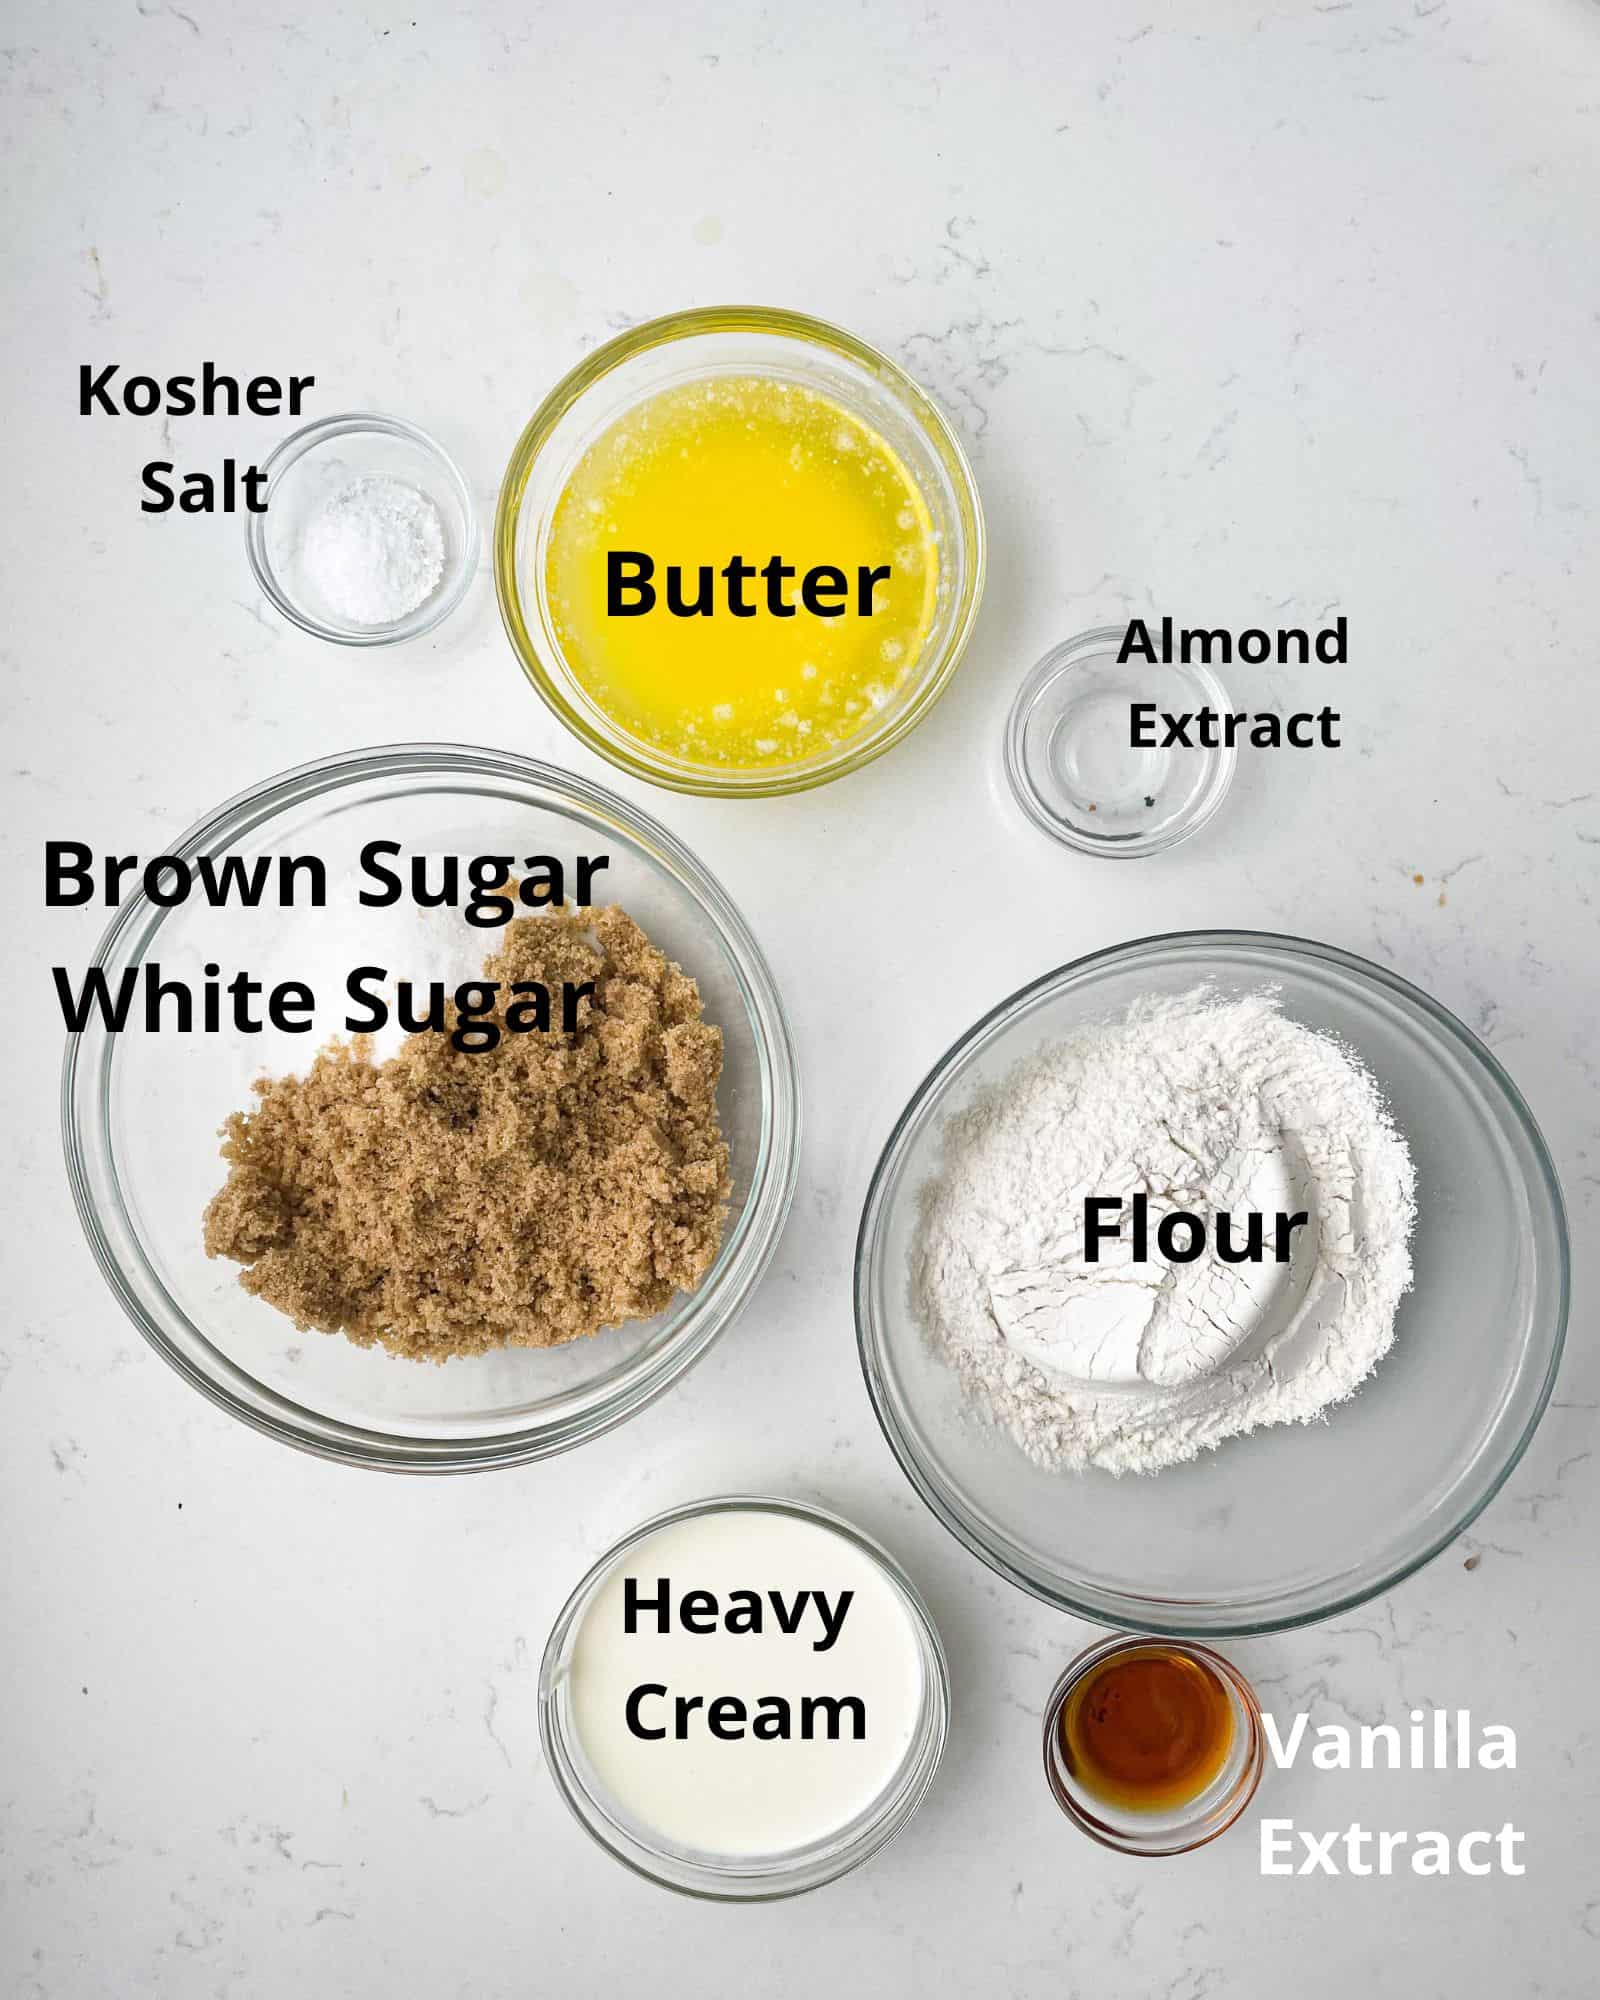 ingredients to make edible sugar cookie dough - butter, flour, brown sugar, white sugar, heavy cream, vanilla extract, almond extract, and kosher salt.